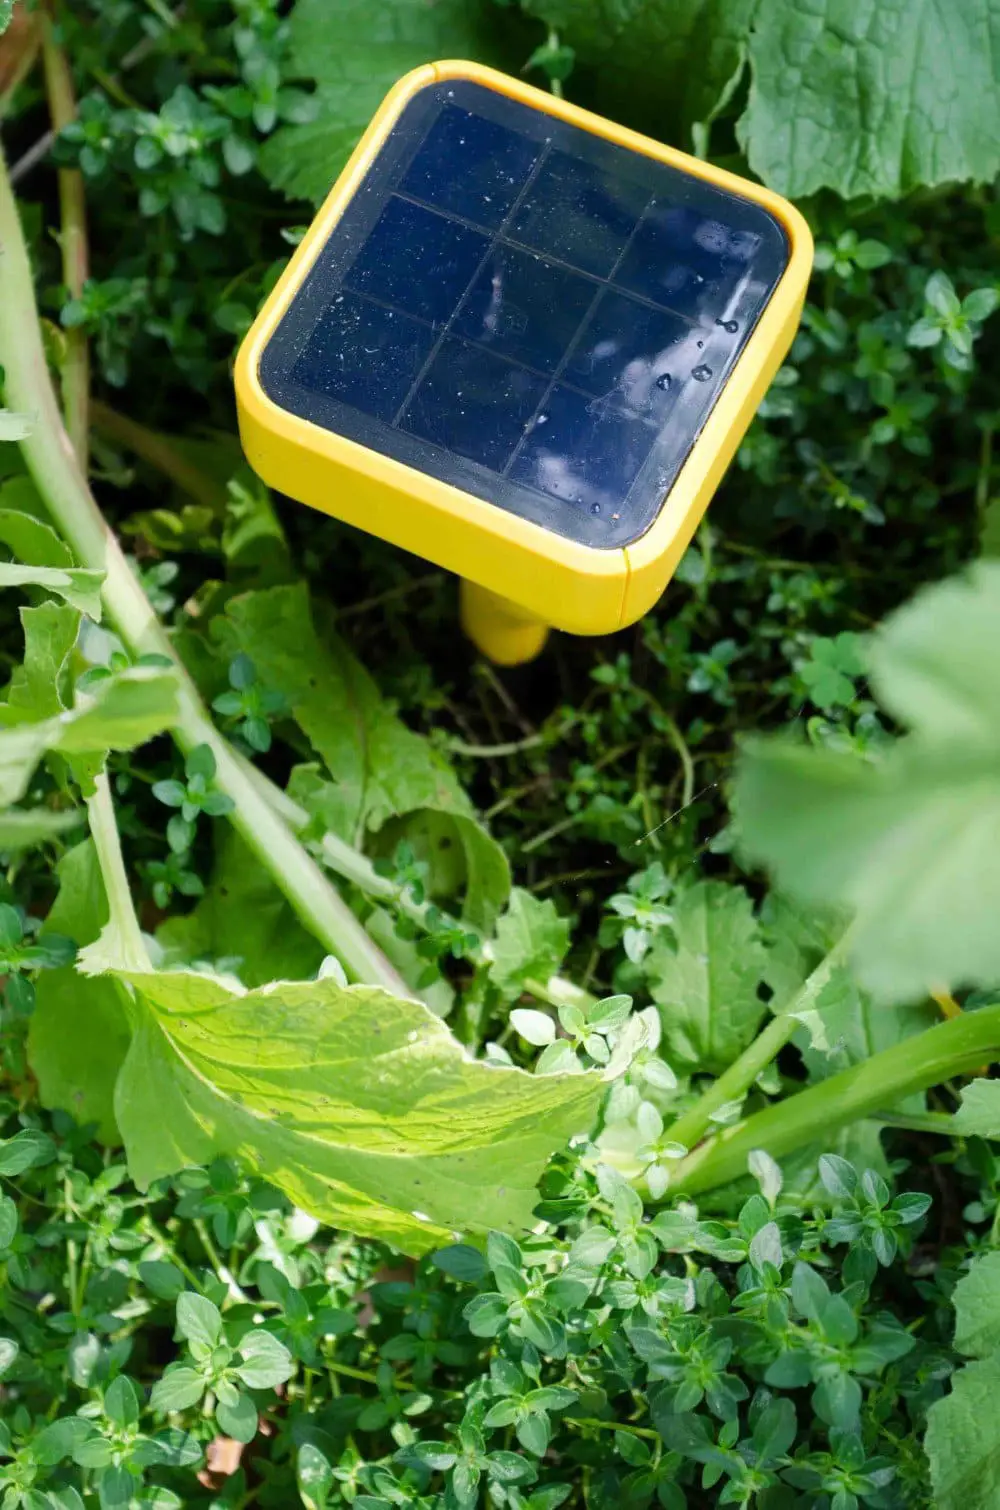 A new garden technology that's changing the way I work in the garden.